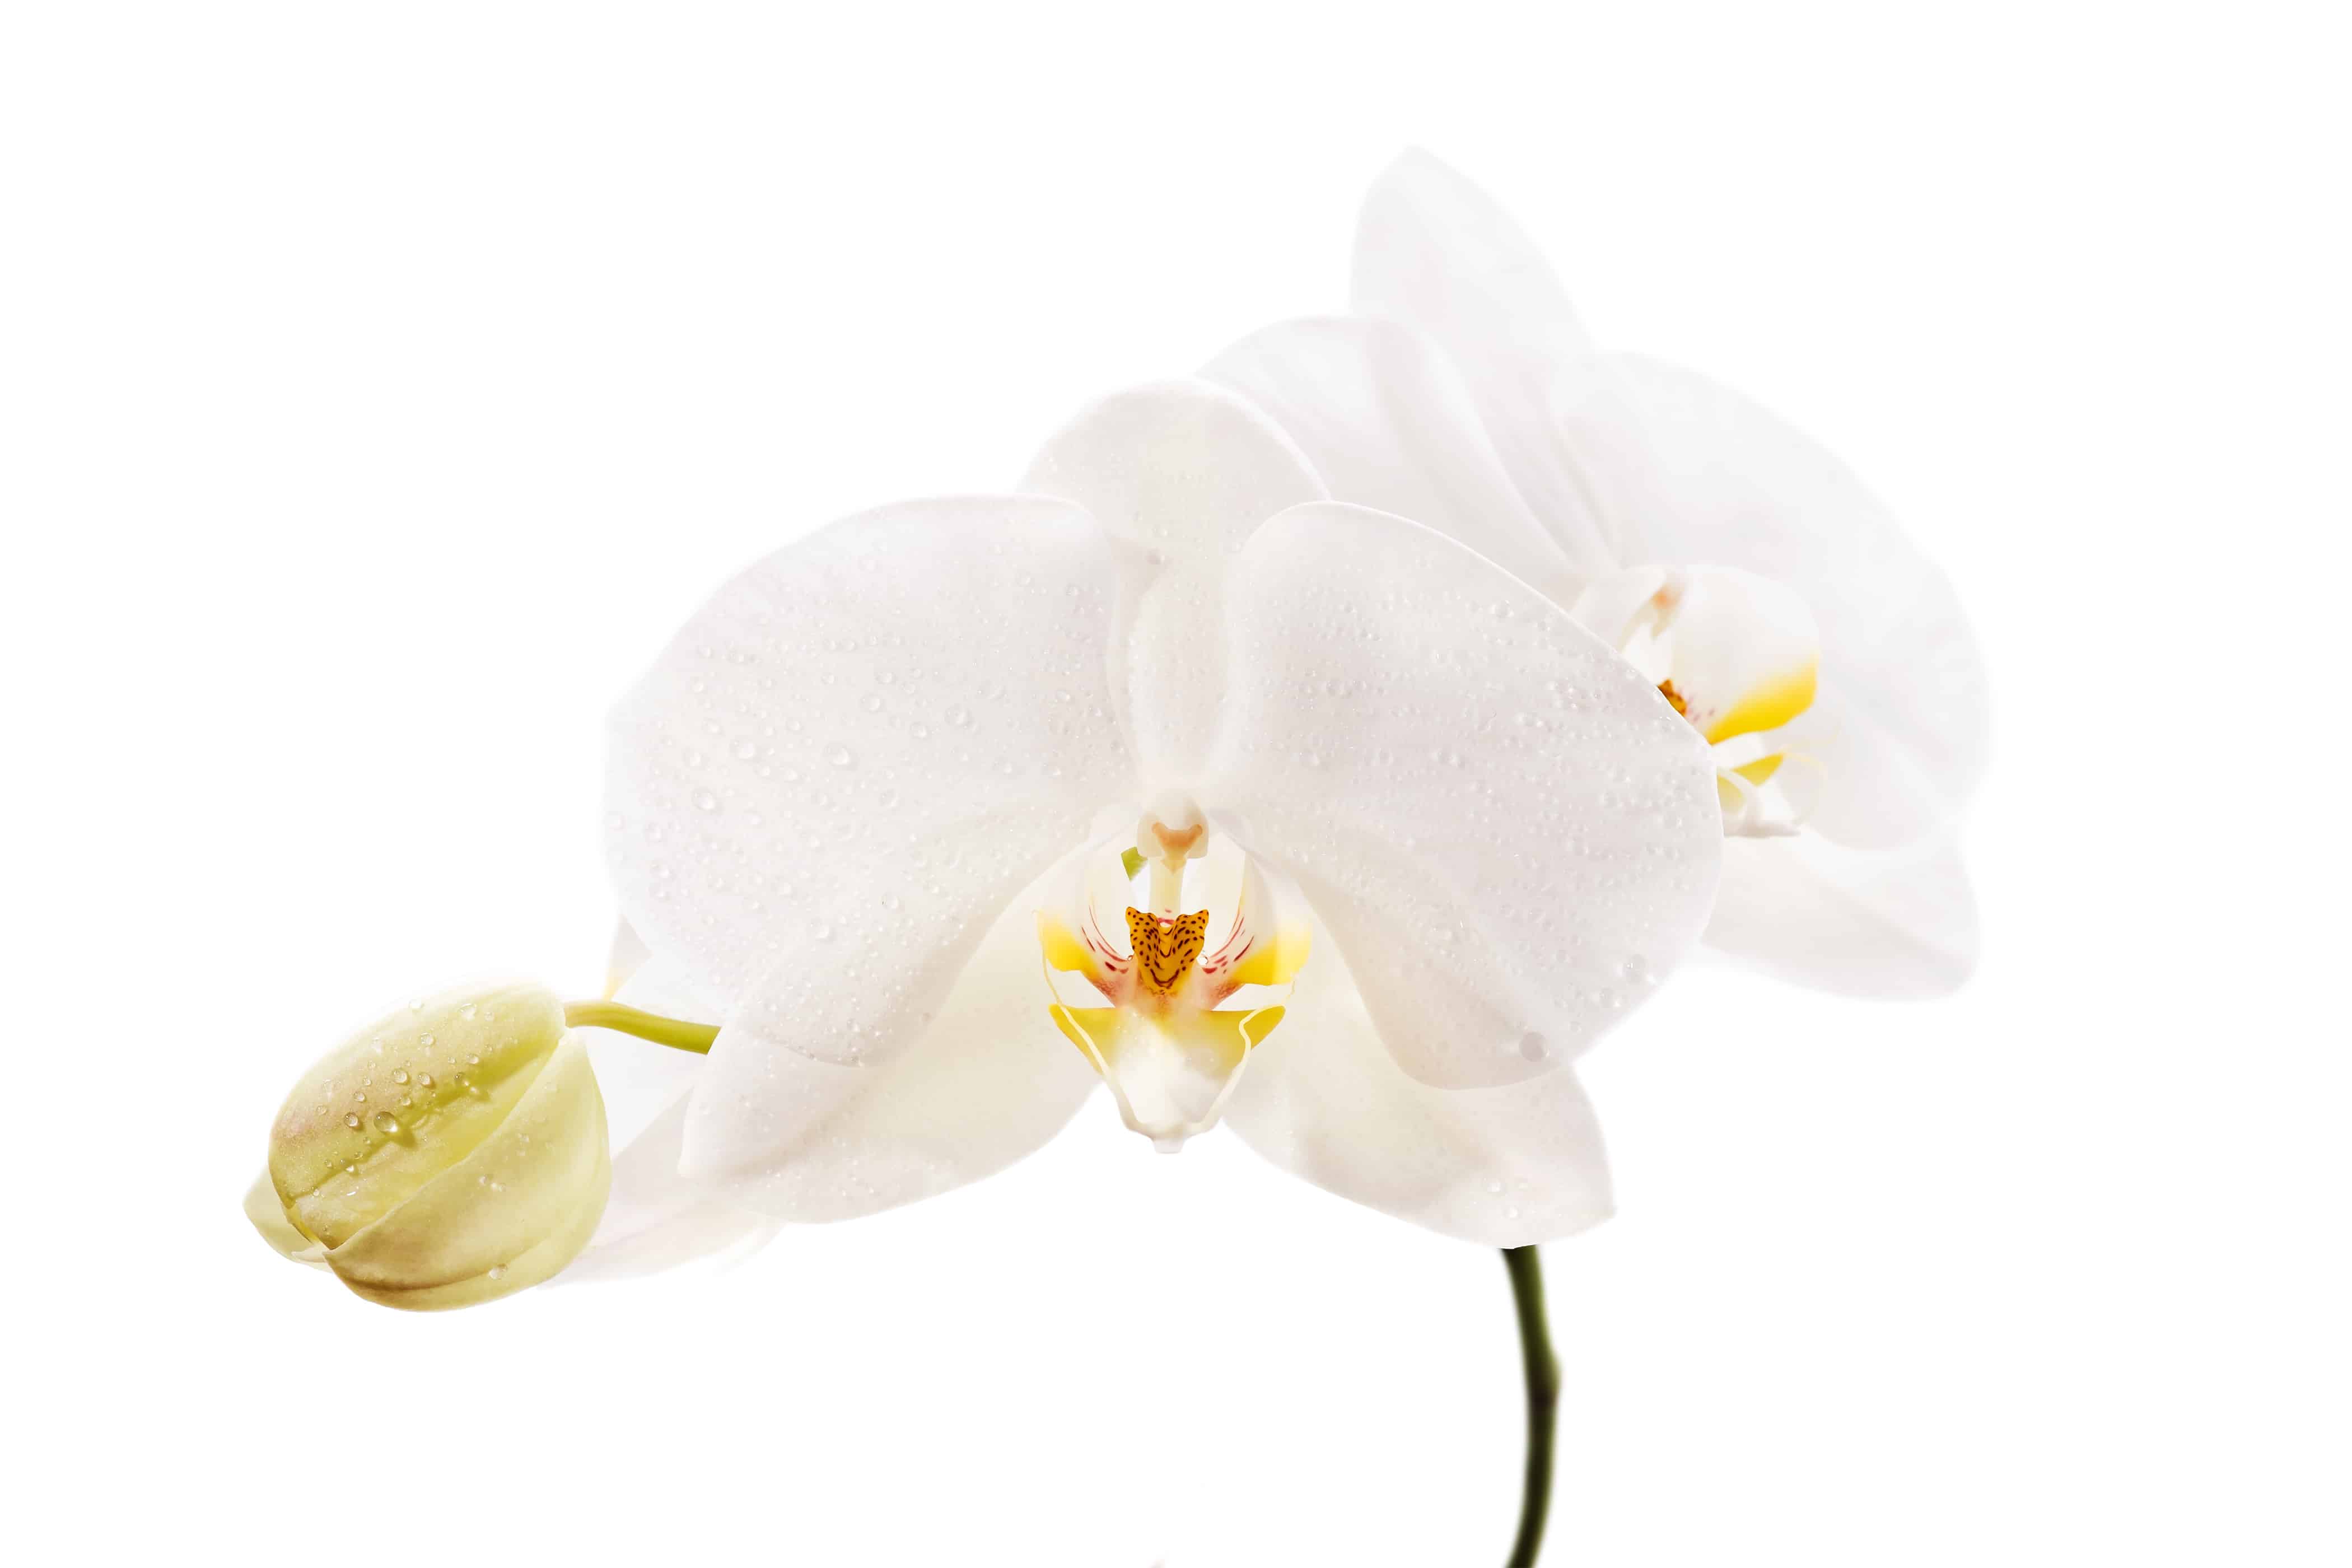 White Orchid closeup on a white background - Manners Mentor